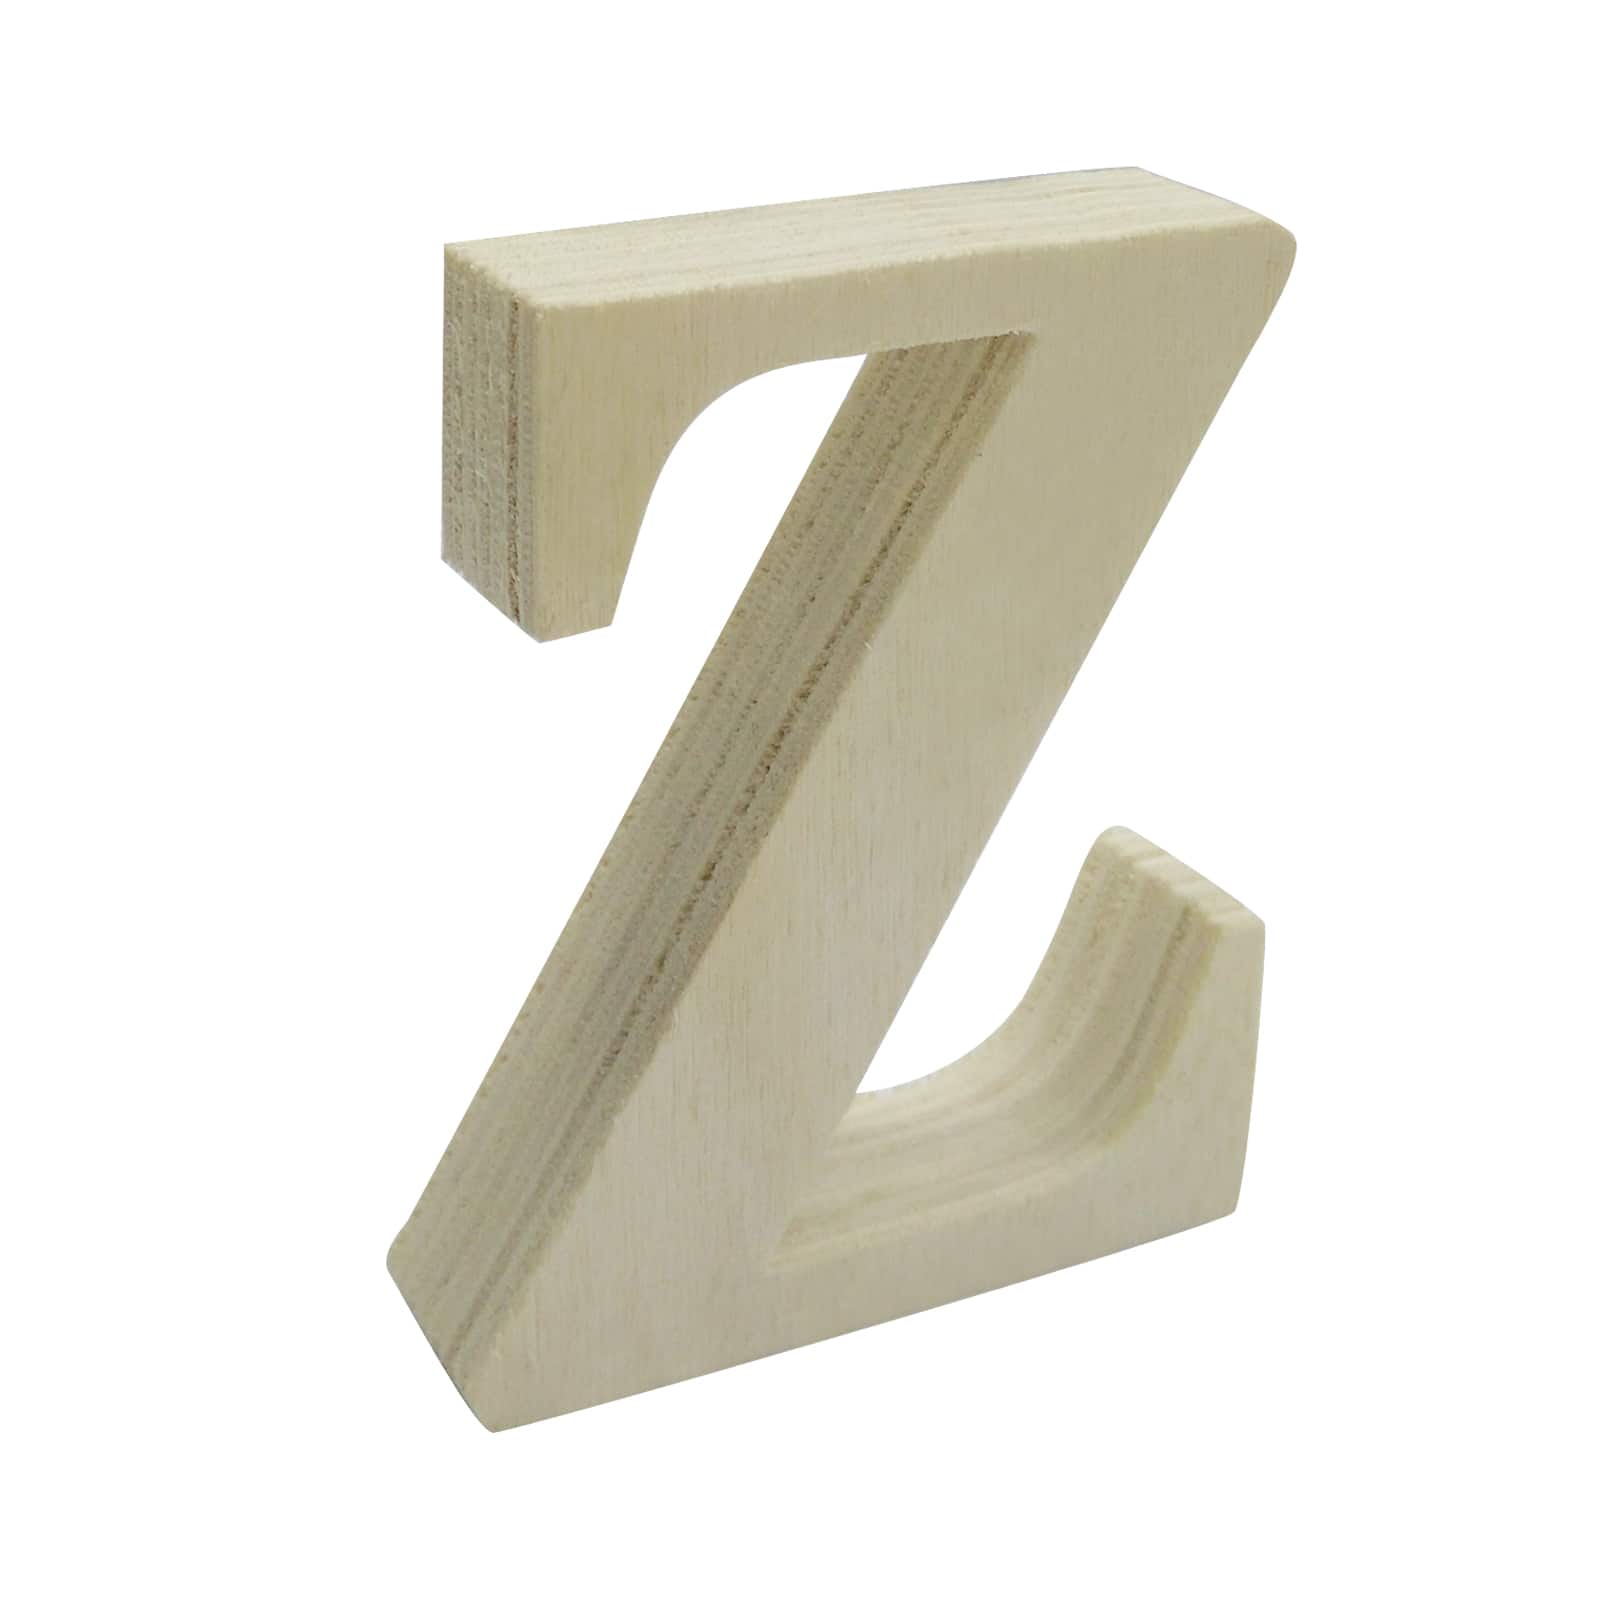 White Wood Letters 3 Inch, Wood Letters for DIY Party Projects (T) 